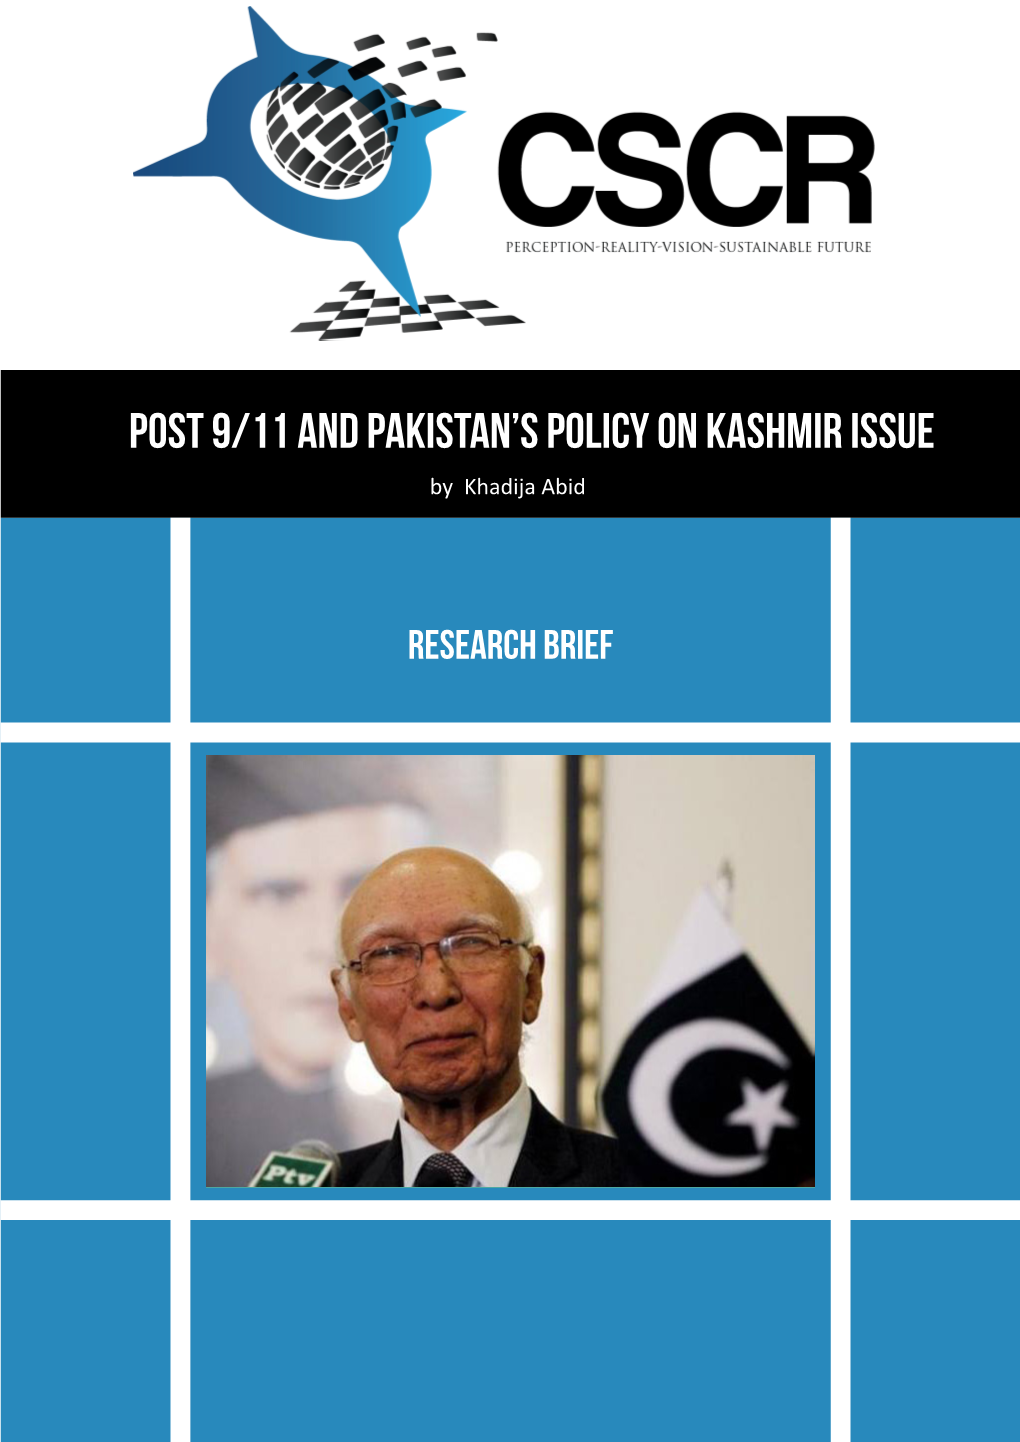 Post 9/11 and Pakistan's Policy on Kashmir Issue